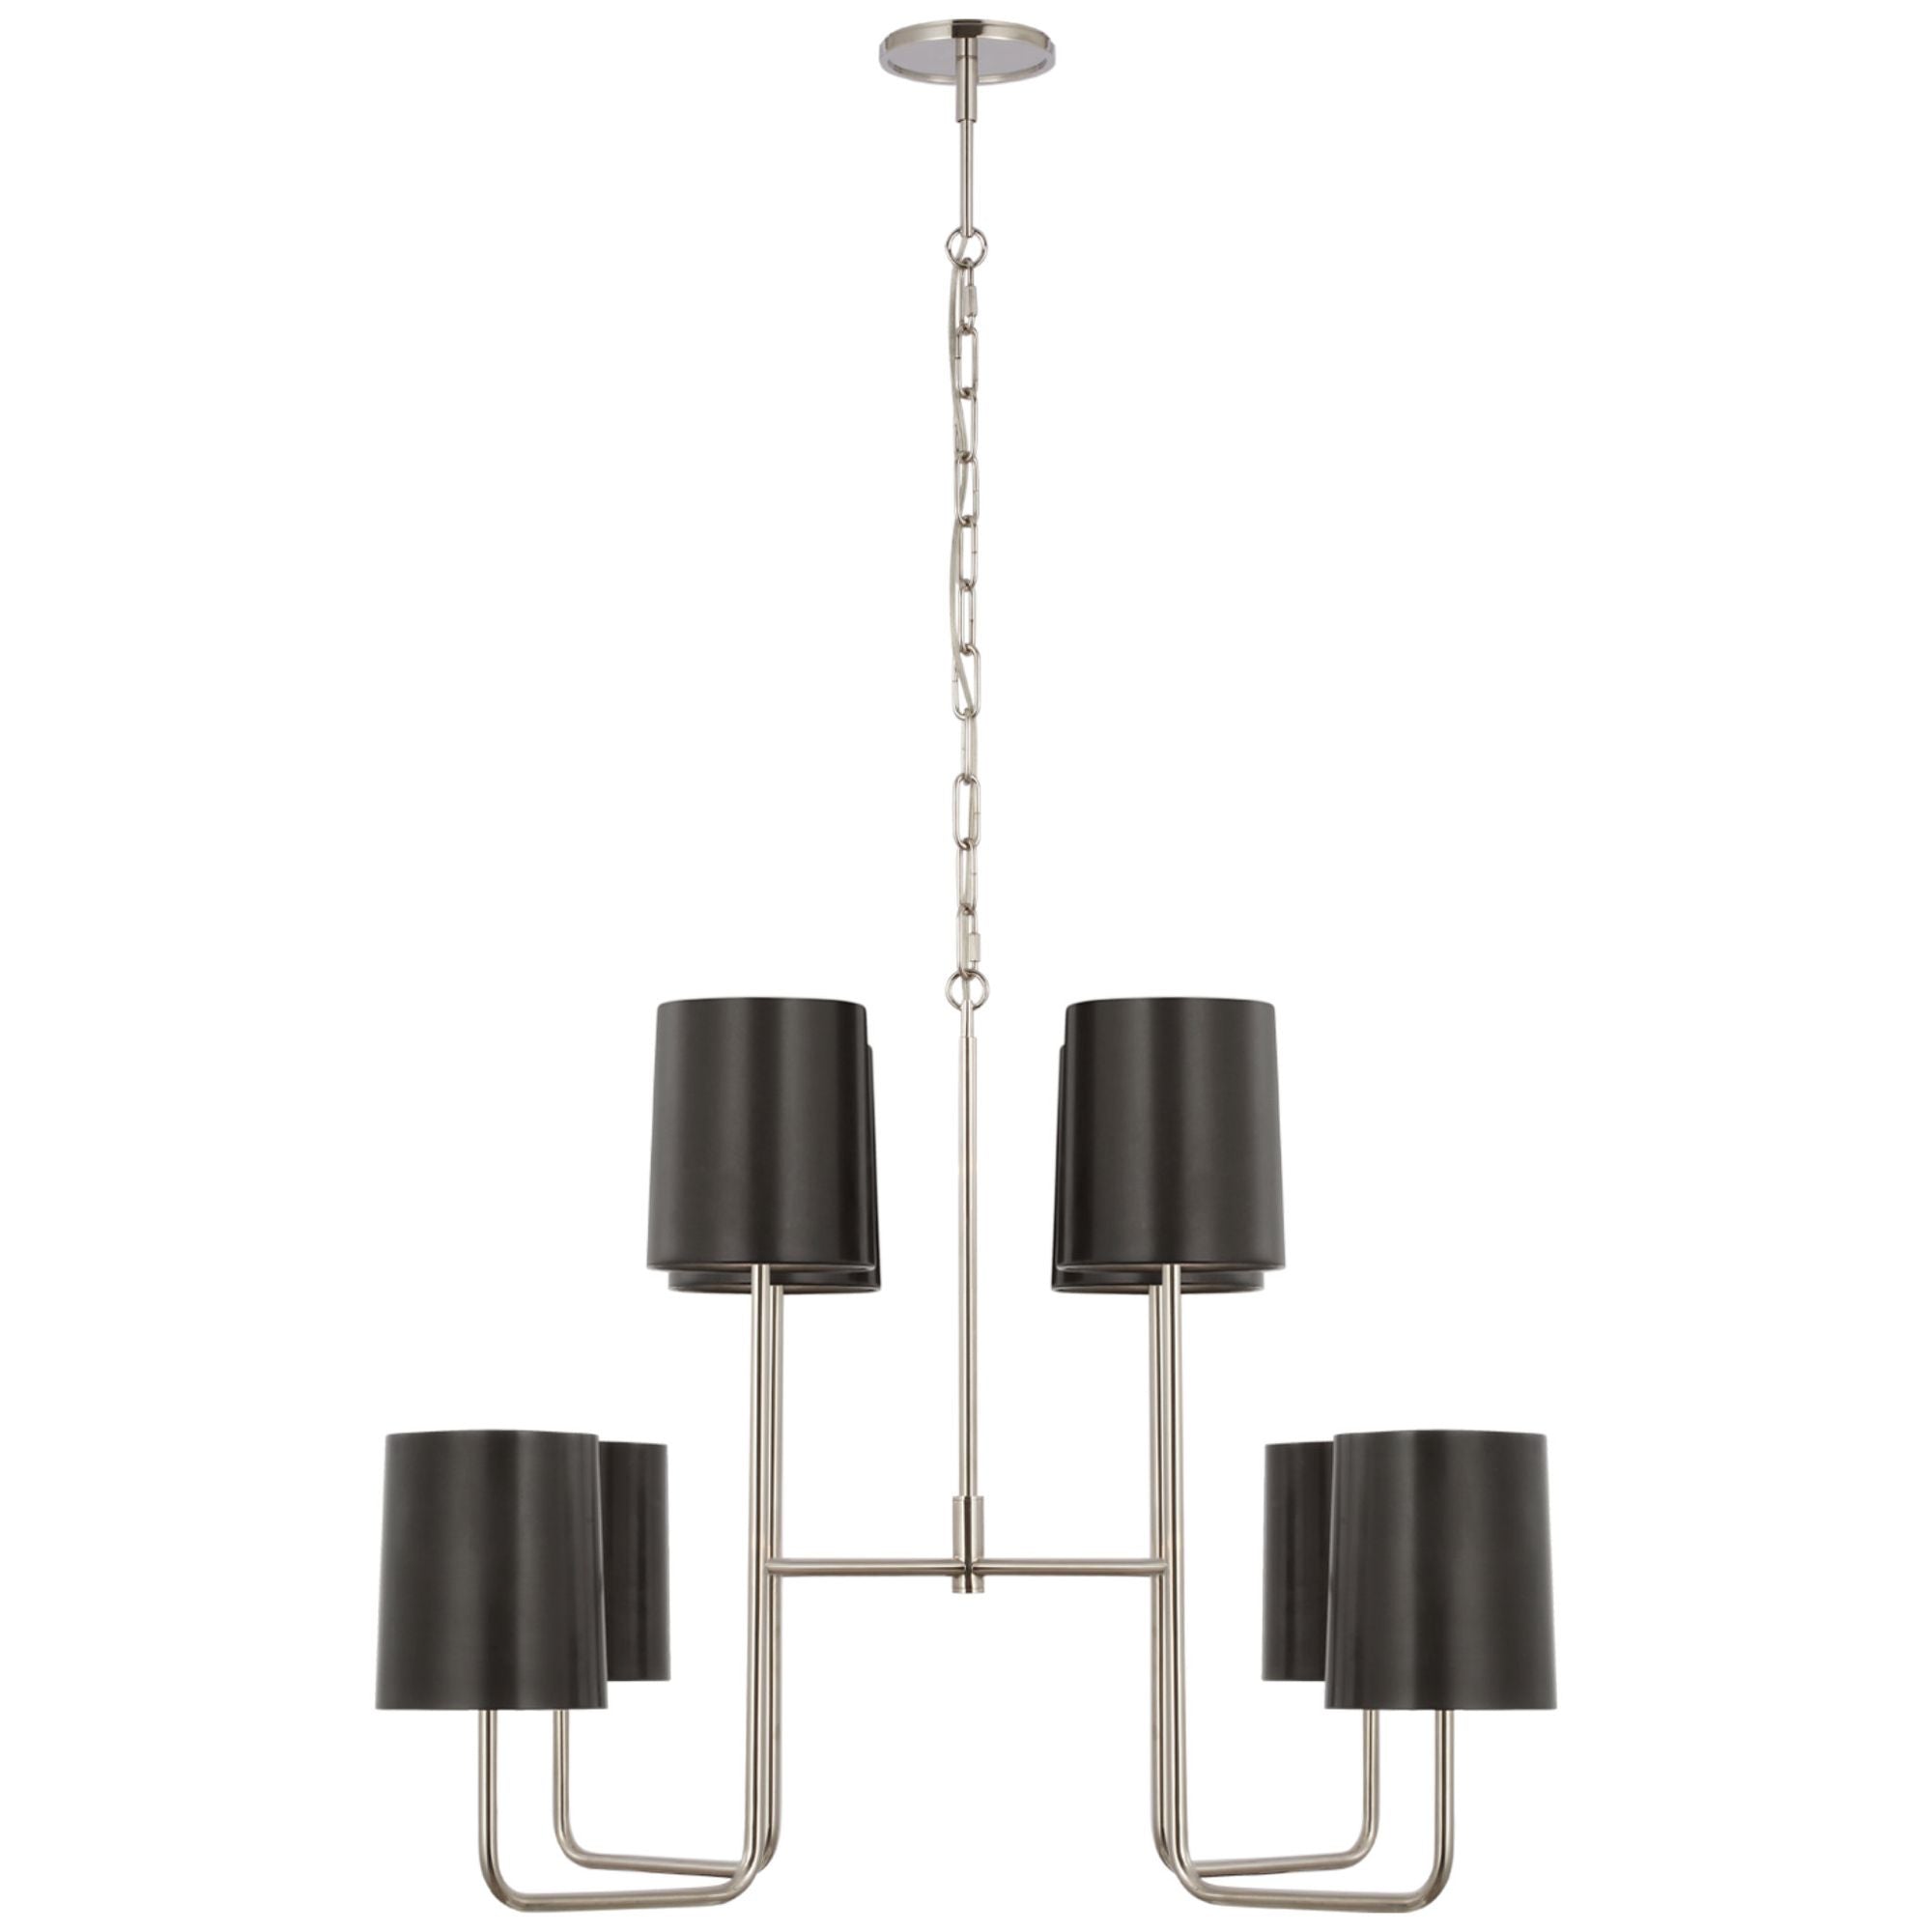 Barbara Barry Go Lightly Extra Large Two Tier Chandelier in Polished Nickel with Bronze Shades